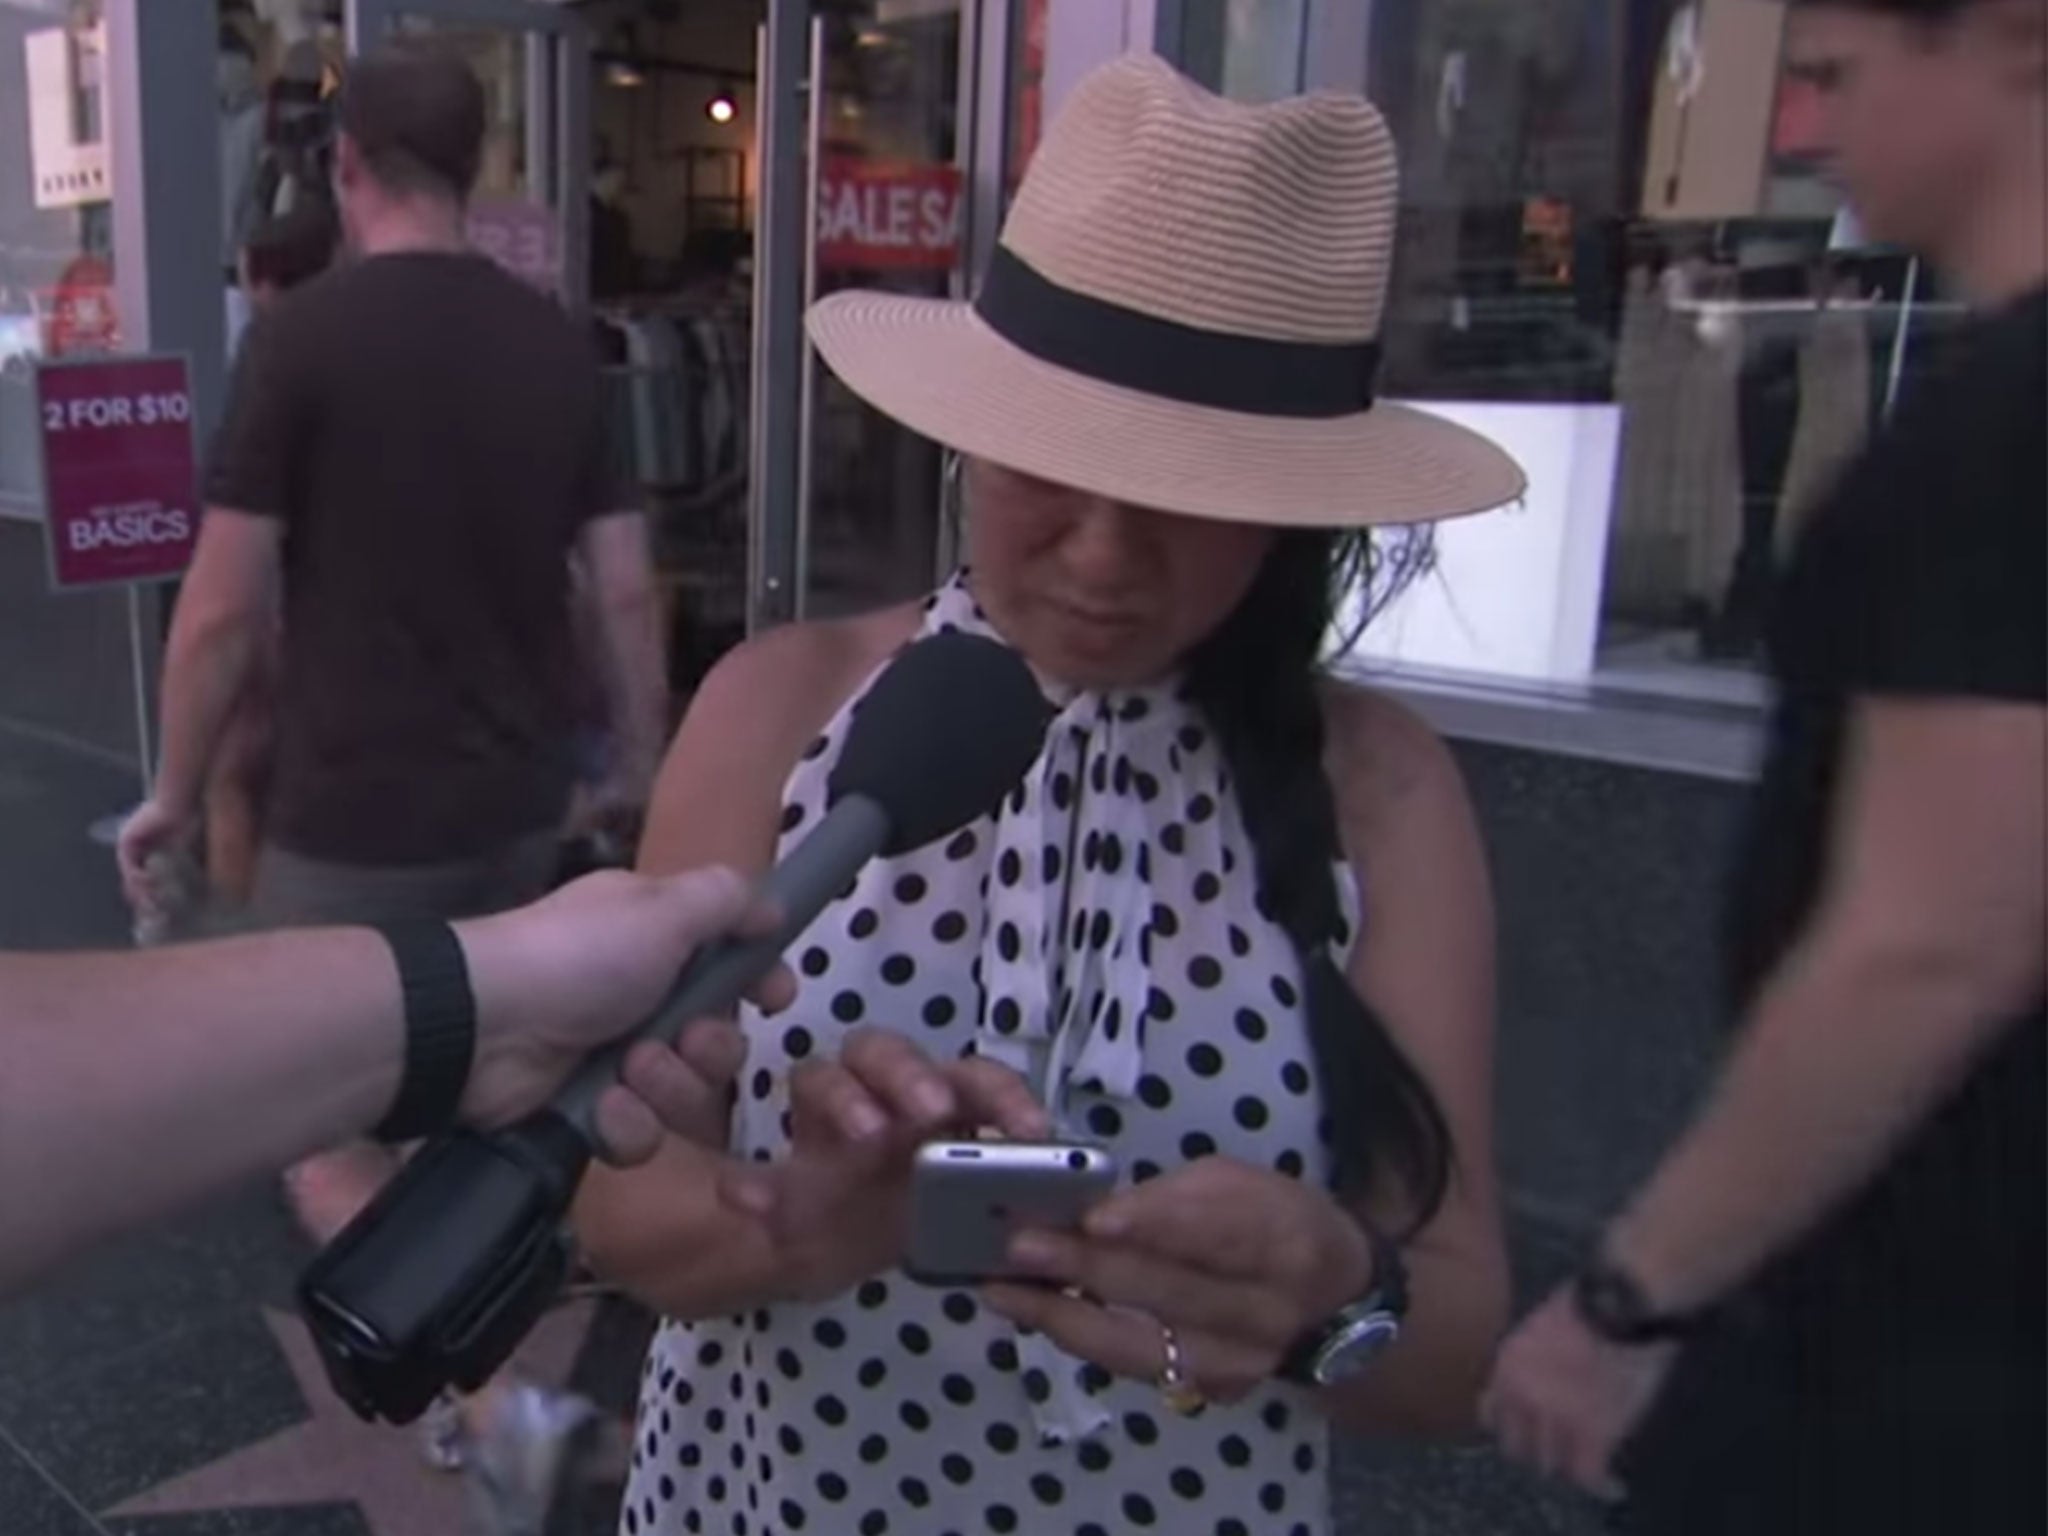 As an experiment, Jimmy Kimmel sent an interviewer to give people on Hollywood Boulevard the original iPhone